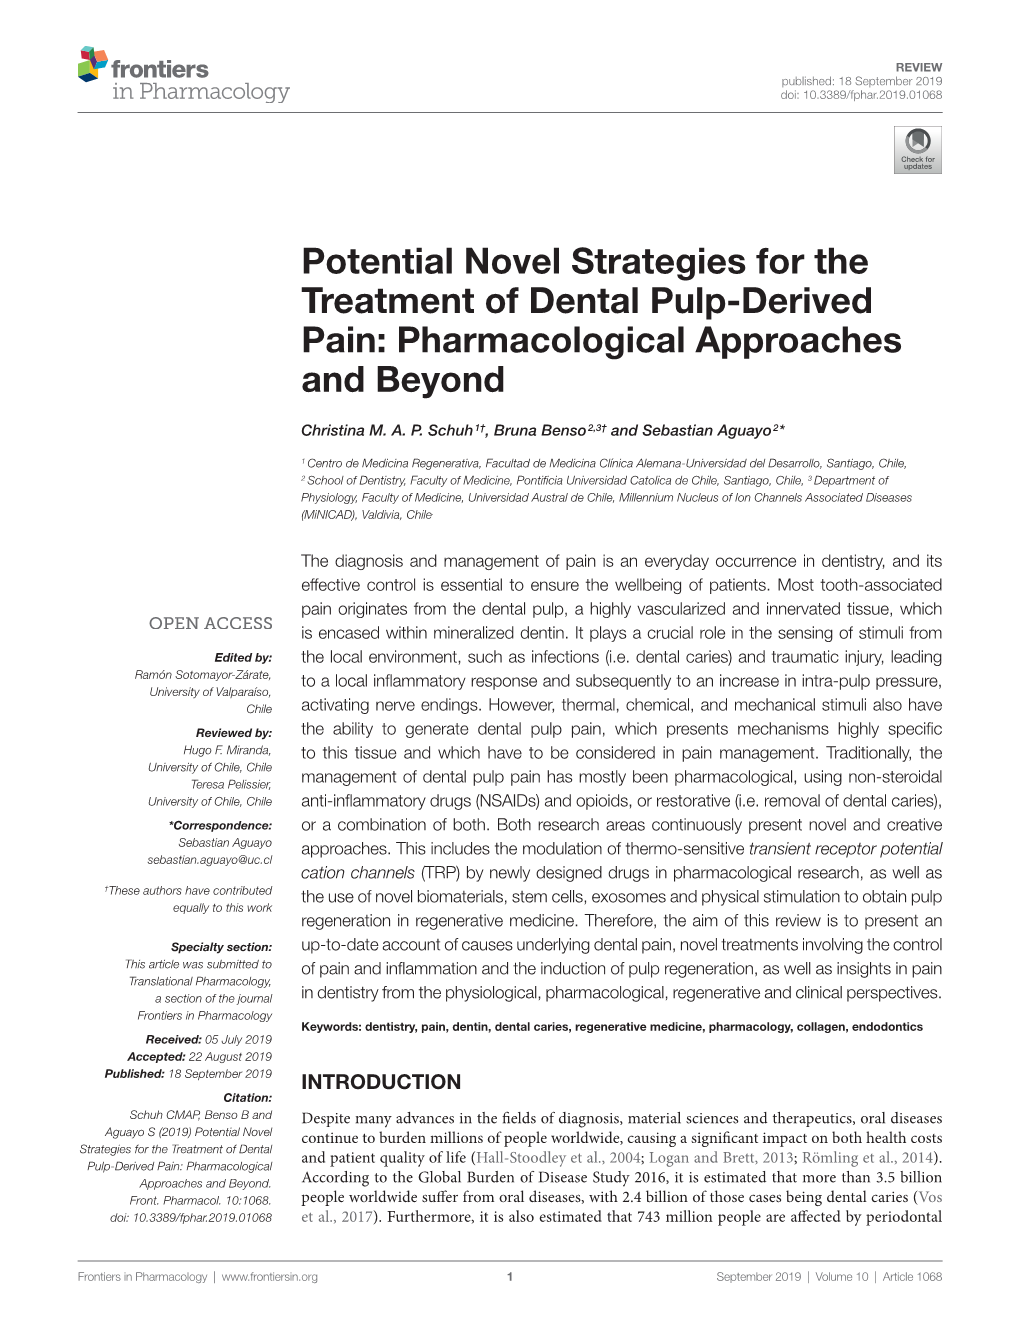 Potential Novel Strategies for the Treatment of Dental Pulp-Derived Pain: Pharmacological Approaches and Beyond